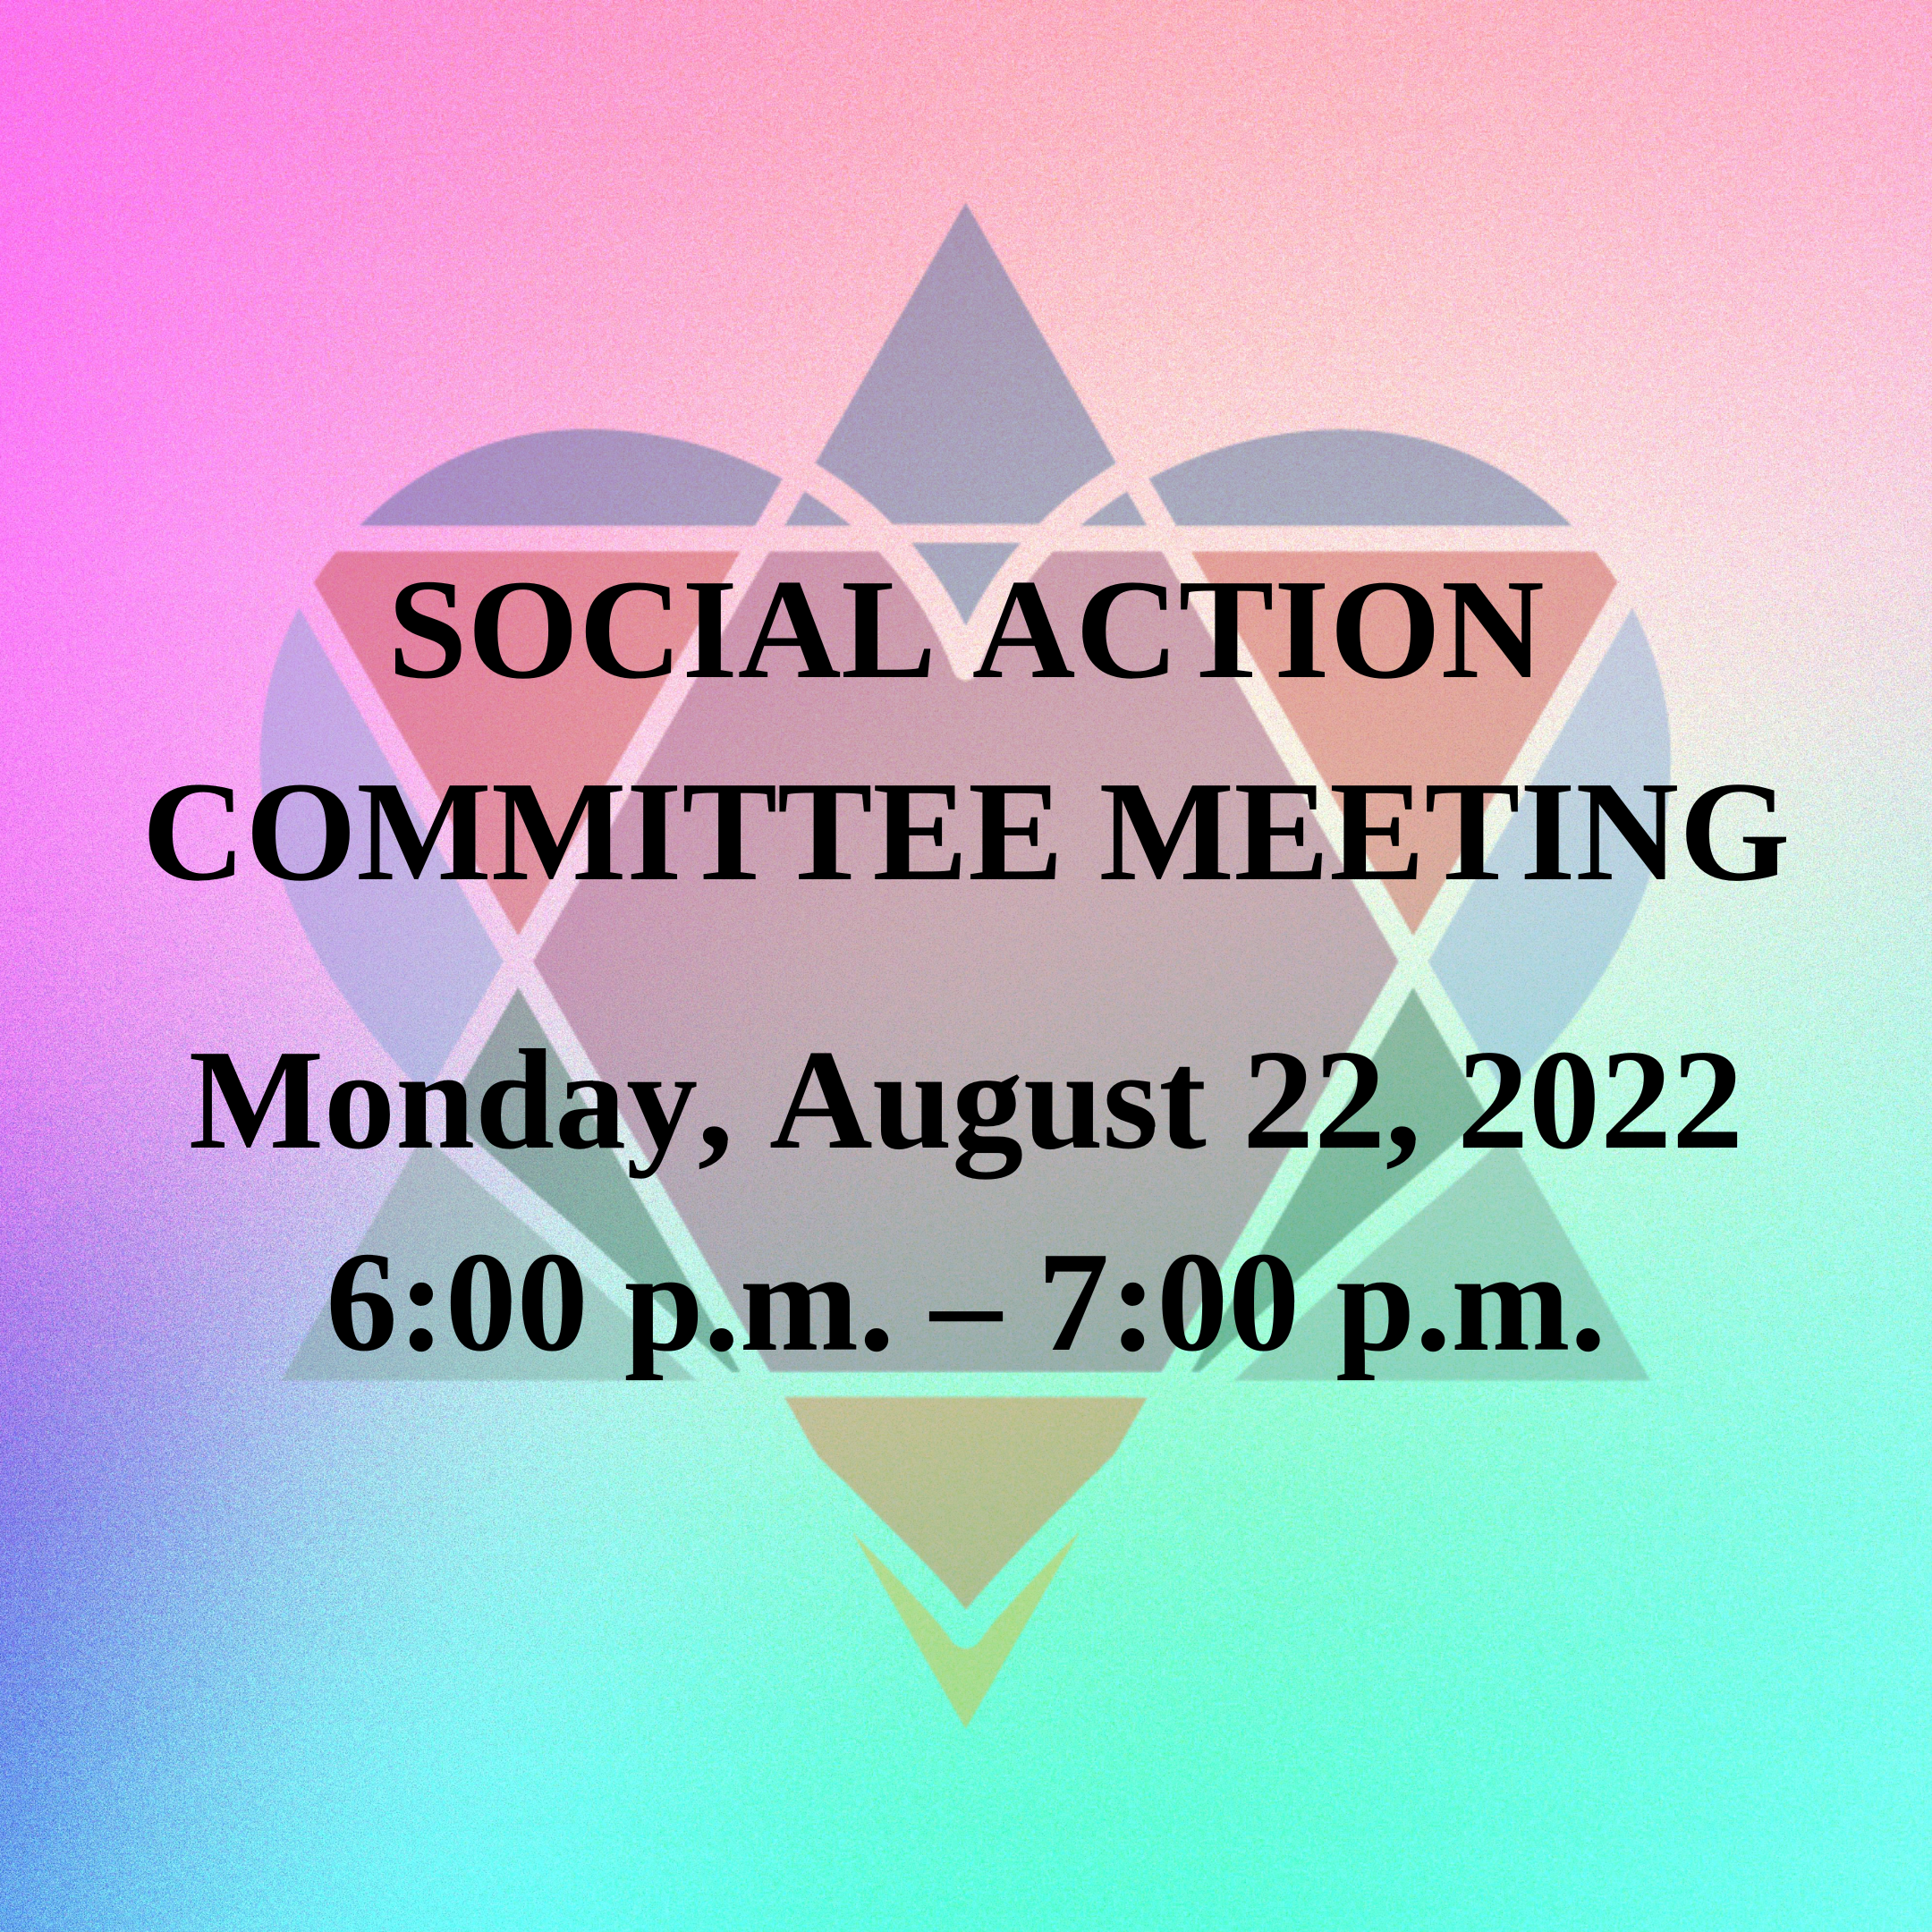 SOCIAL ACTION COMMITTEE MEETING